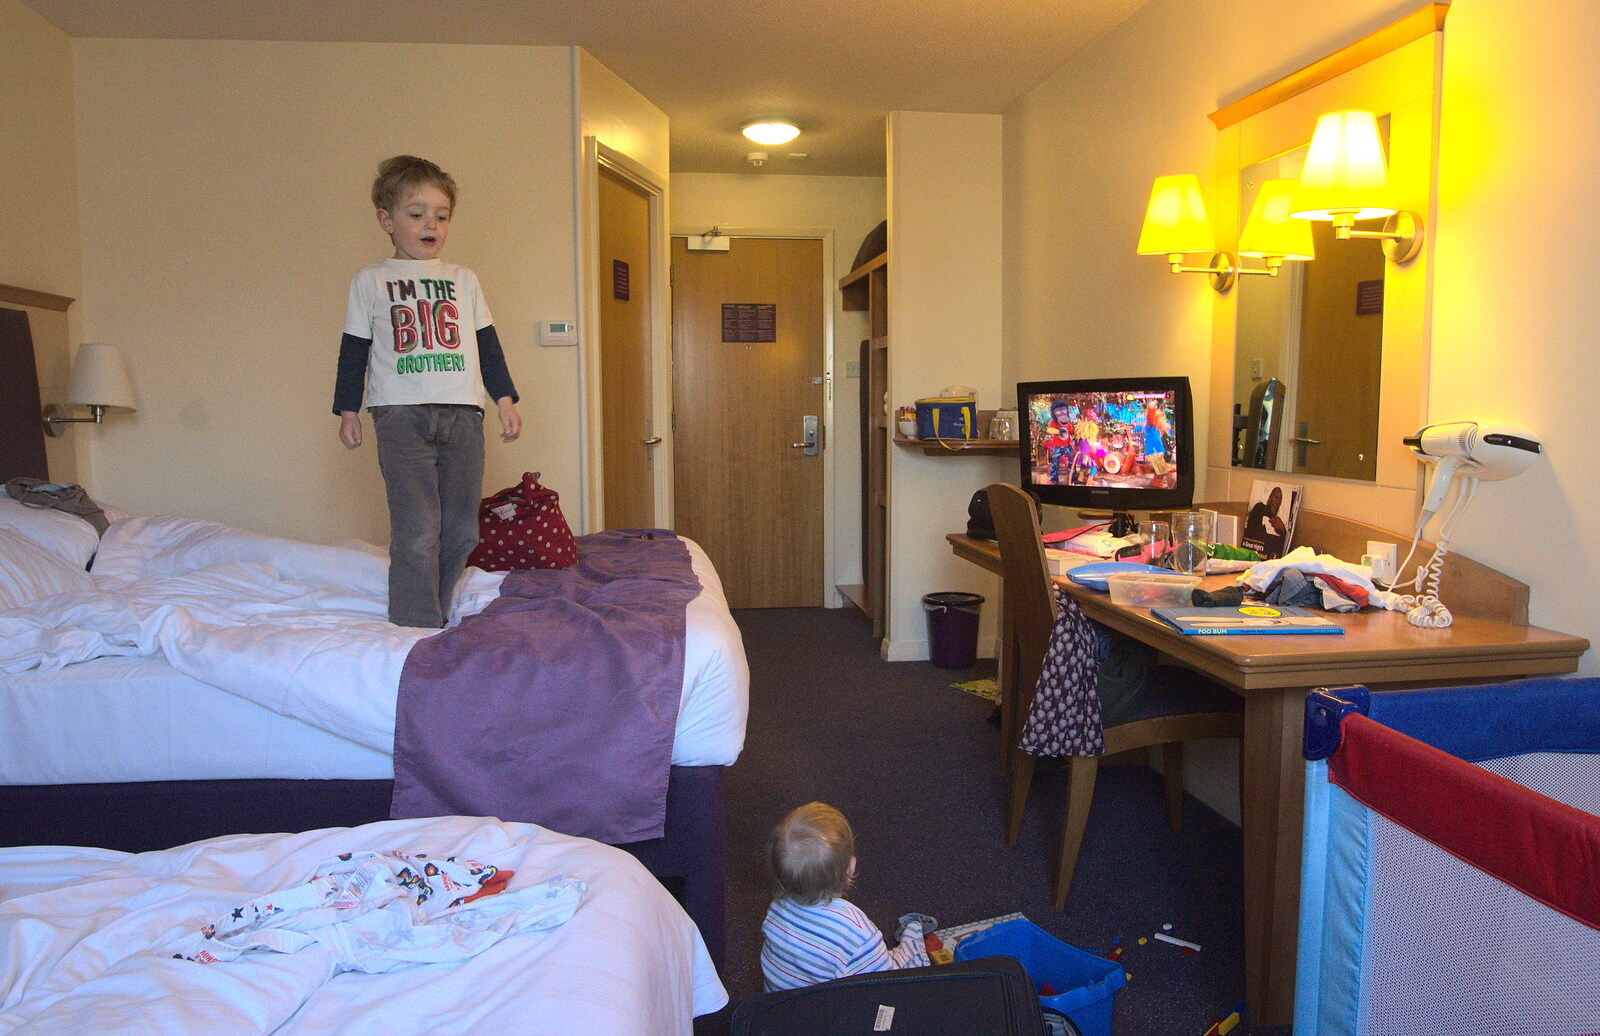 The boys bounce around in the Premier Inn room from Chesterfield and the Twisty Spire, Derbyshire - 19th April 2013